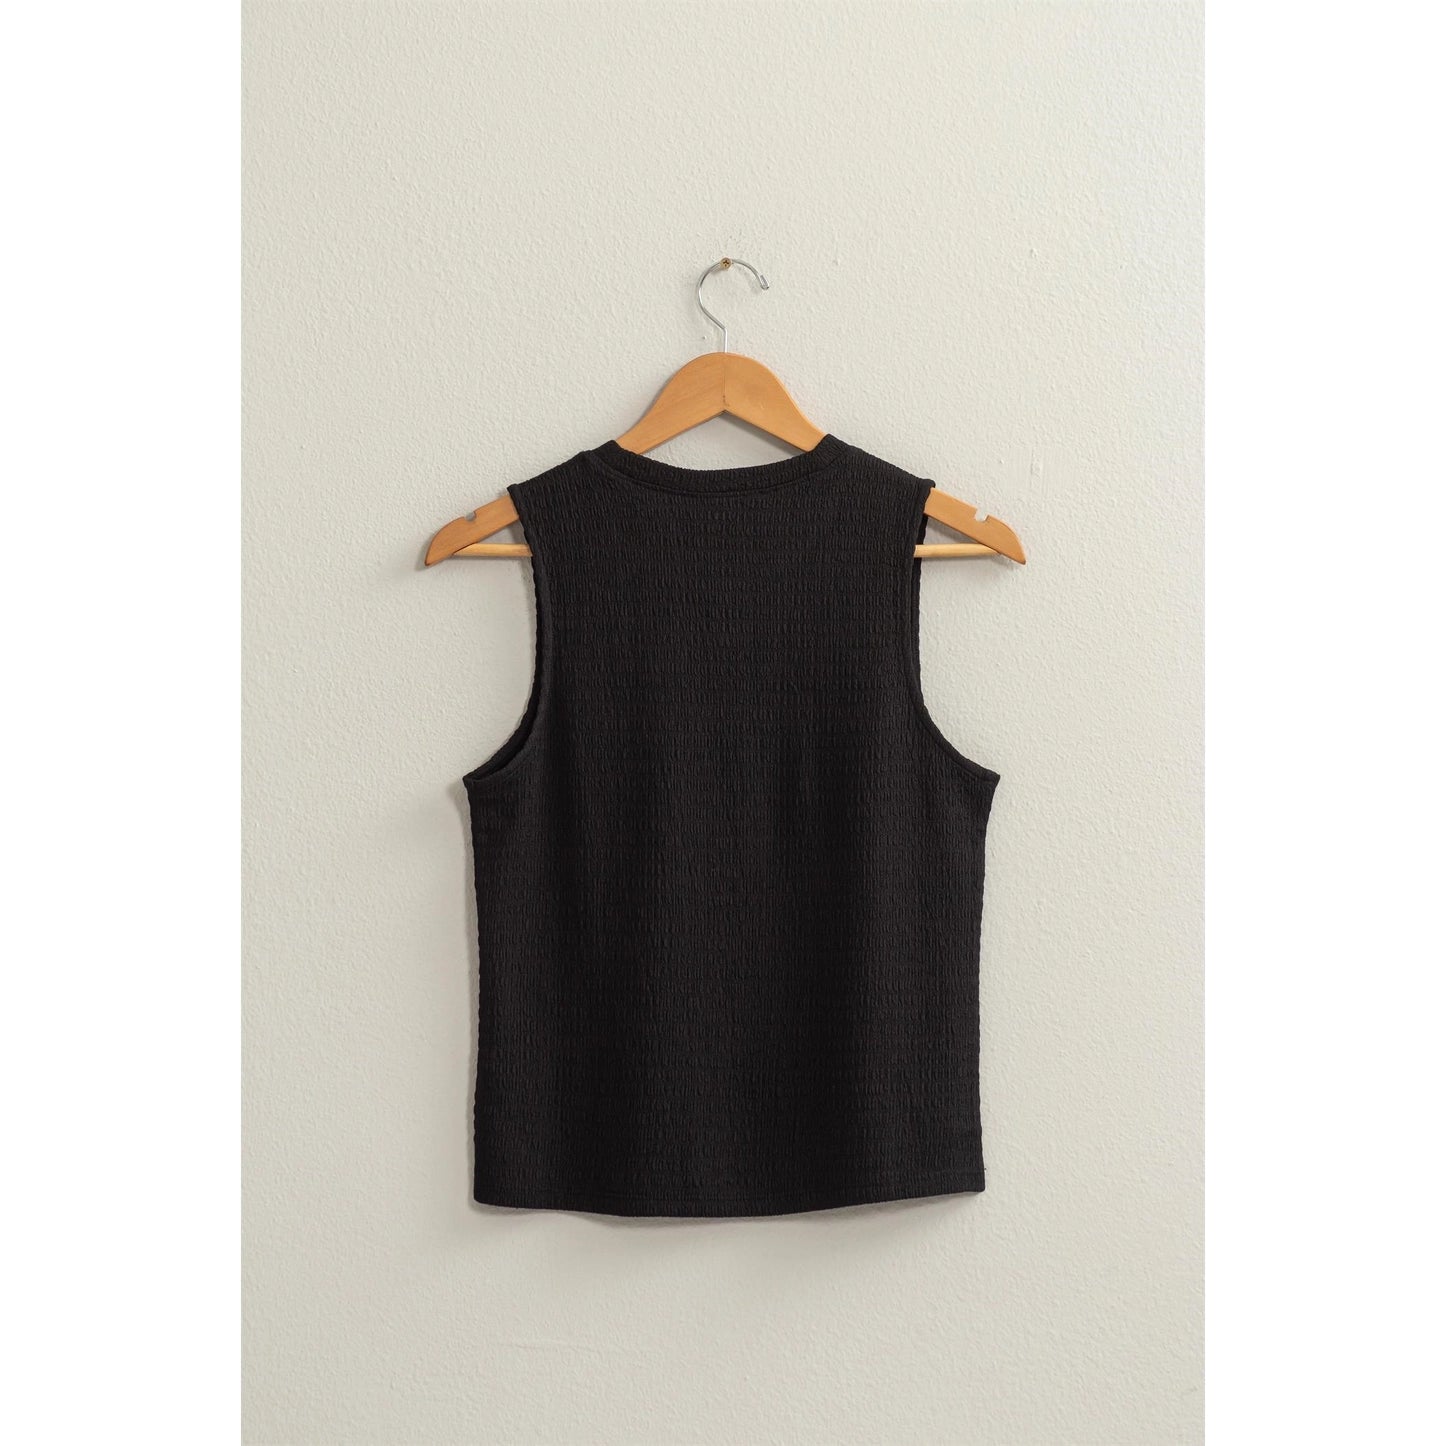 GO Getter Relaxed Fit Sleeveless Top